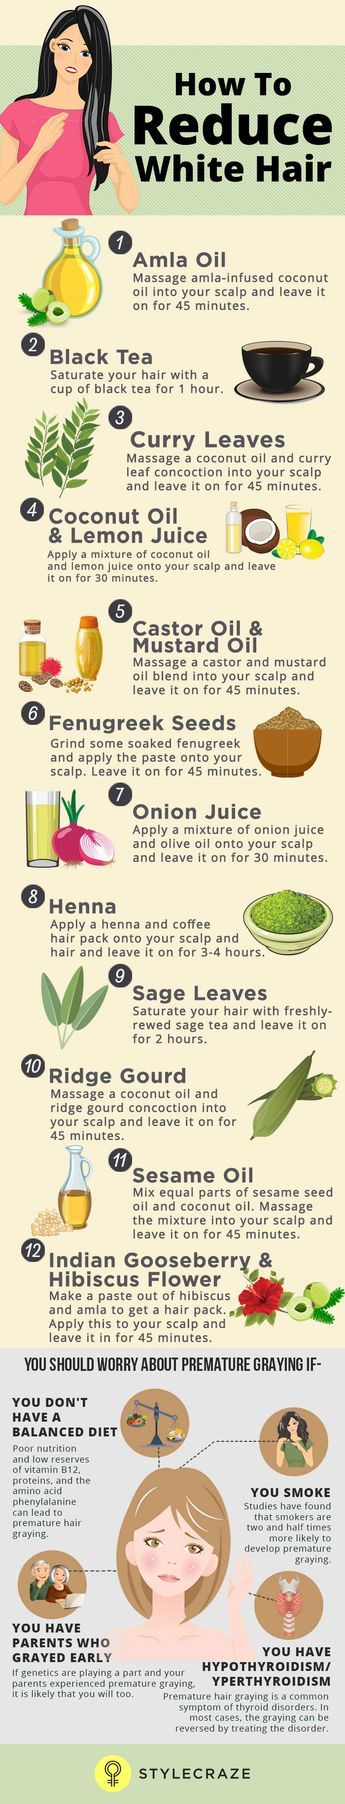 Balayage, Nutrition, Hair Growth, Remedy For White Hair, Causes Of White Hair, Good Skin Tips, Natural Skin Care, Natural Skin Care Remedies, Homemade Hair Treatments